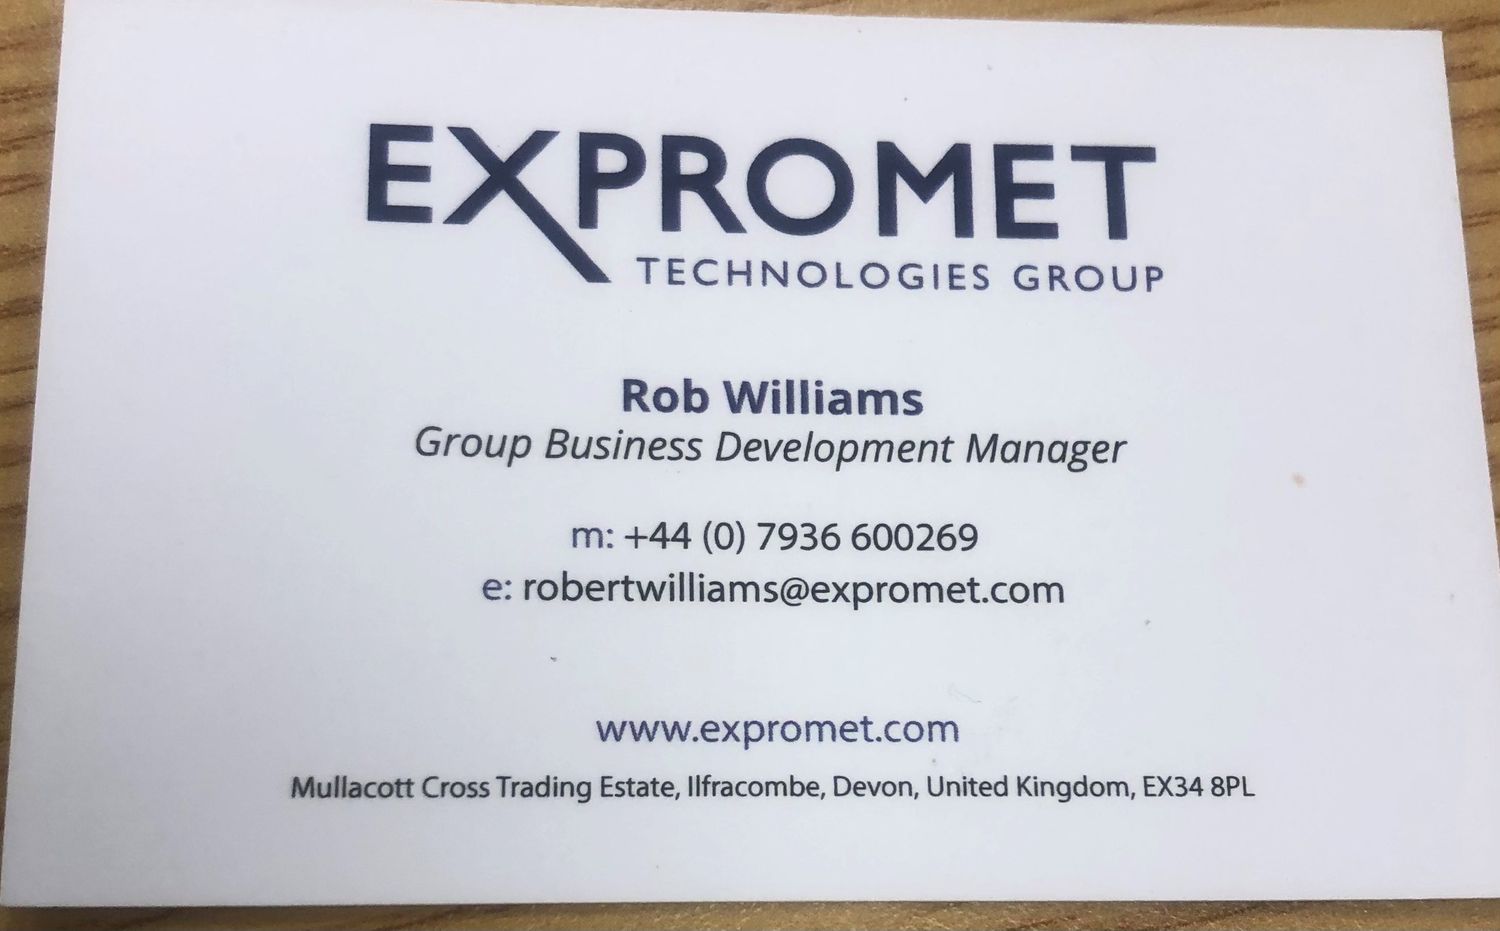 Expromet Technologies Group